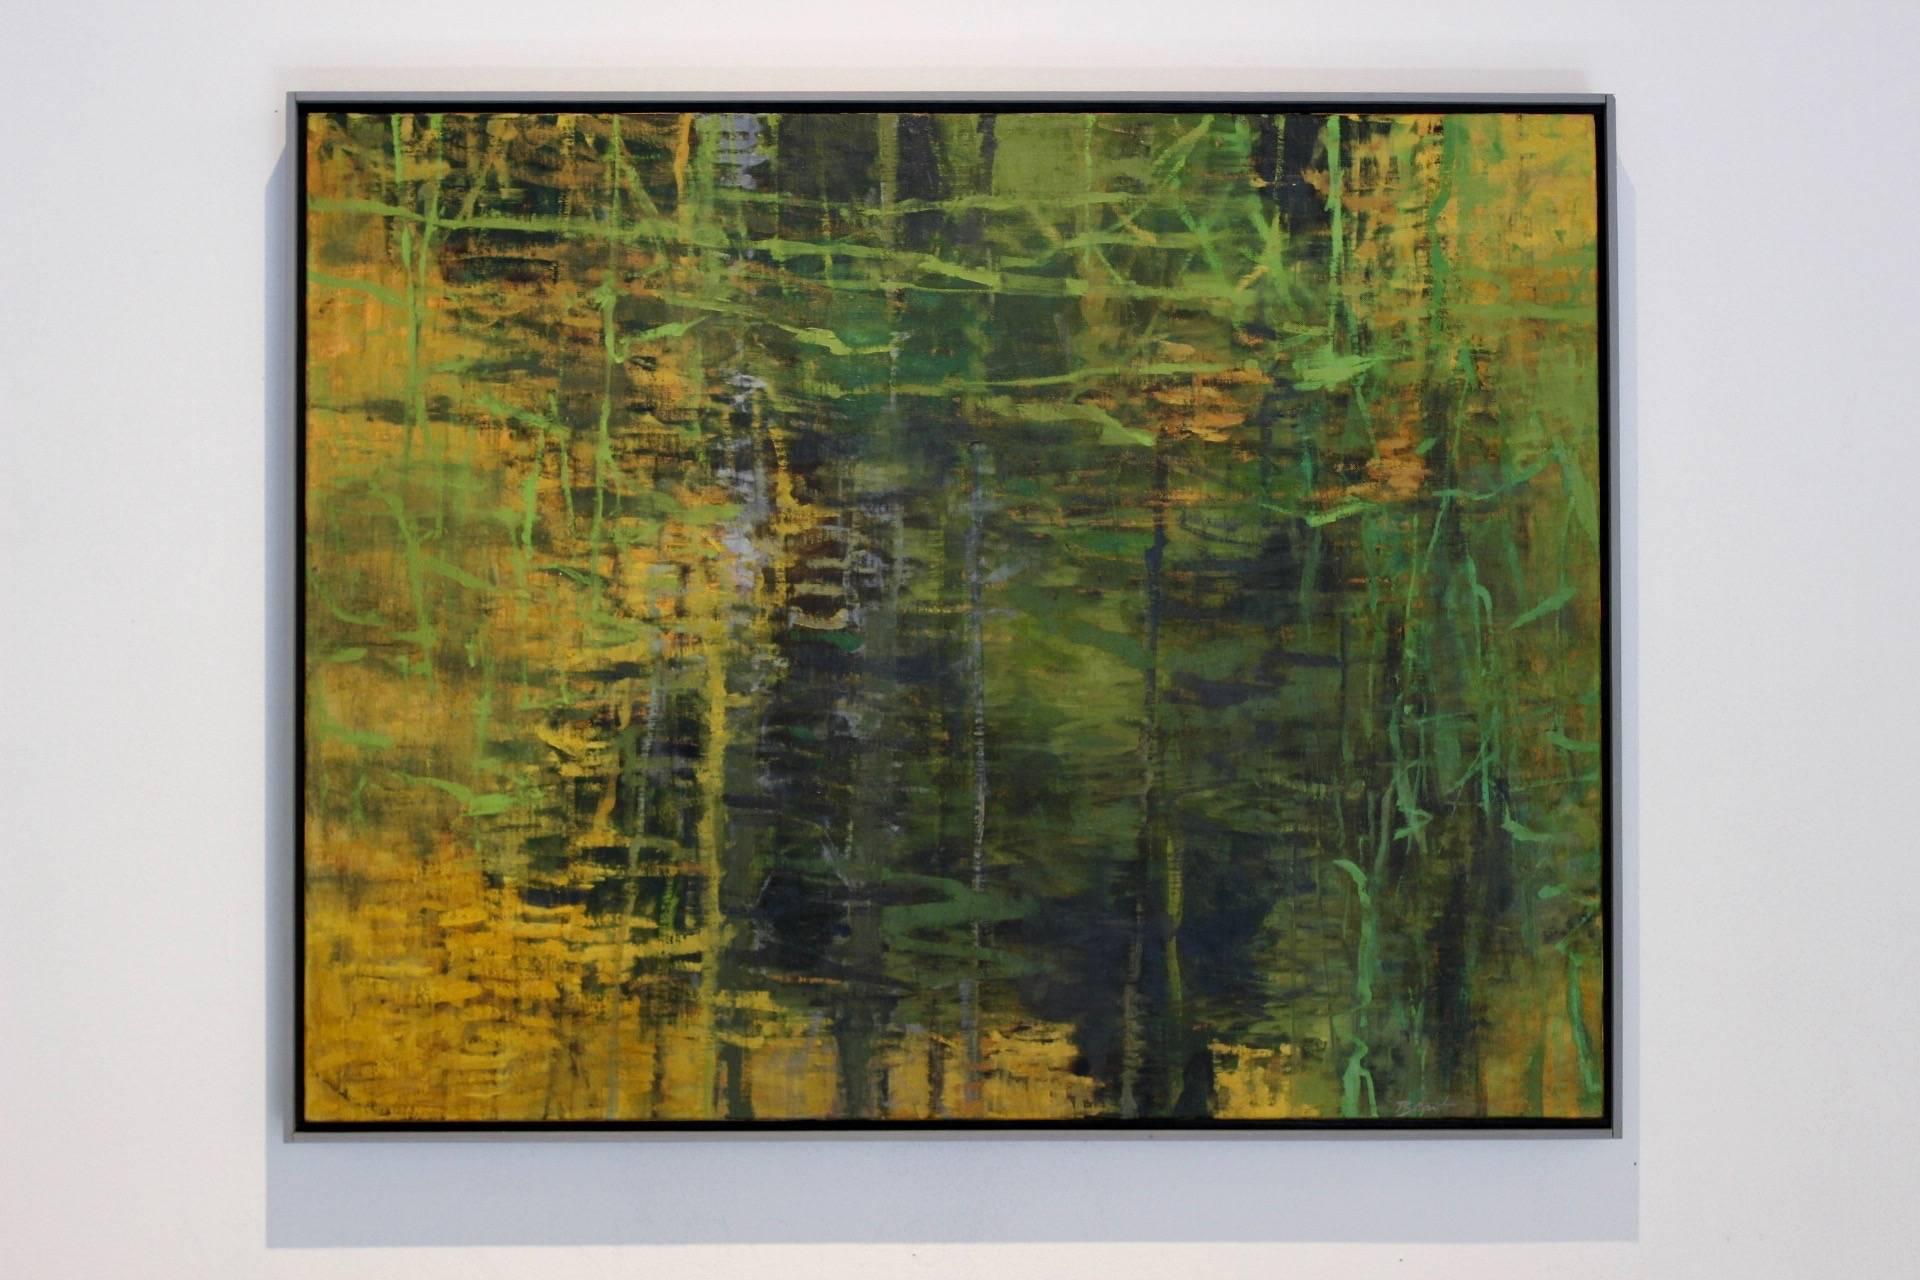 This oil painting depicts an abstracted New England landscape using gold and yellow to create light, and green to illustrates plants and earth.

M Fine Arts is honored to announce the addition of Robert Baart to our roster of contemporary artists.